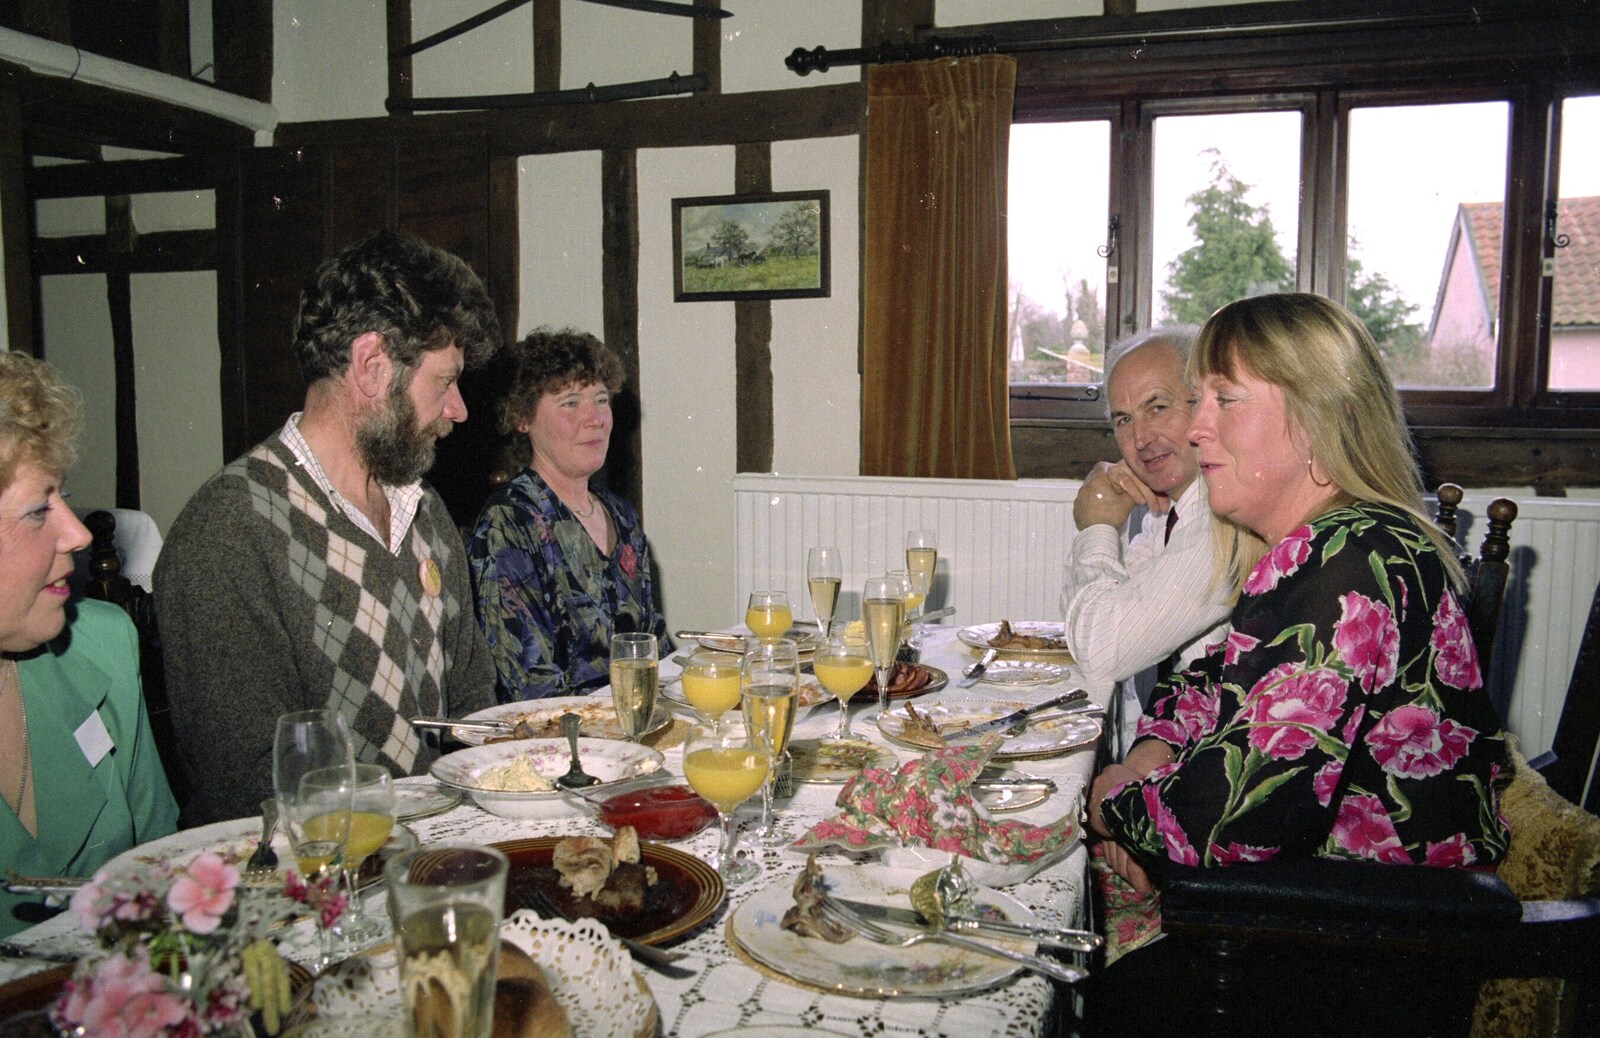 Geoff, Brenda and Sue from Dinner Round Geoff and Brenda's, and Hamish Visits, Stuston, Suffolk - 6th April 1992